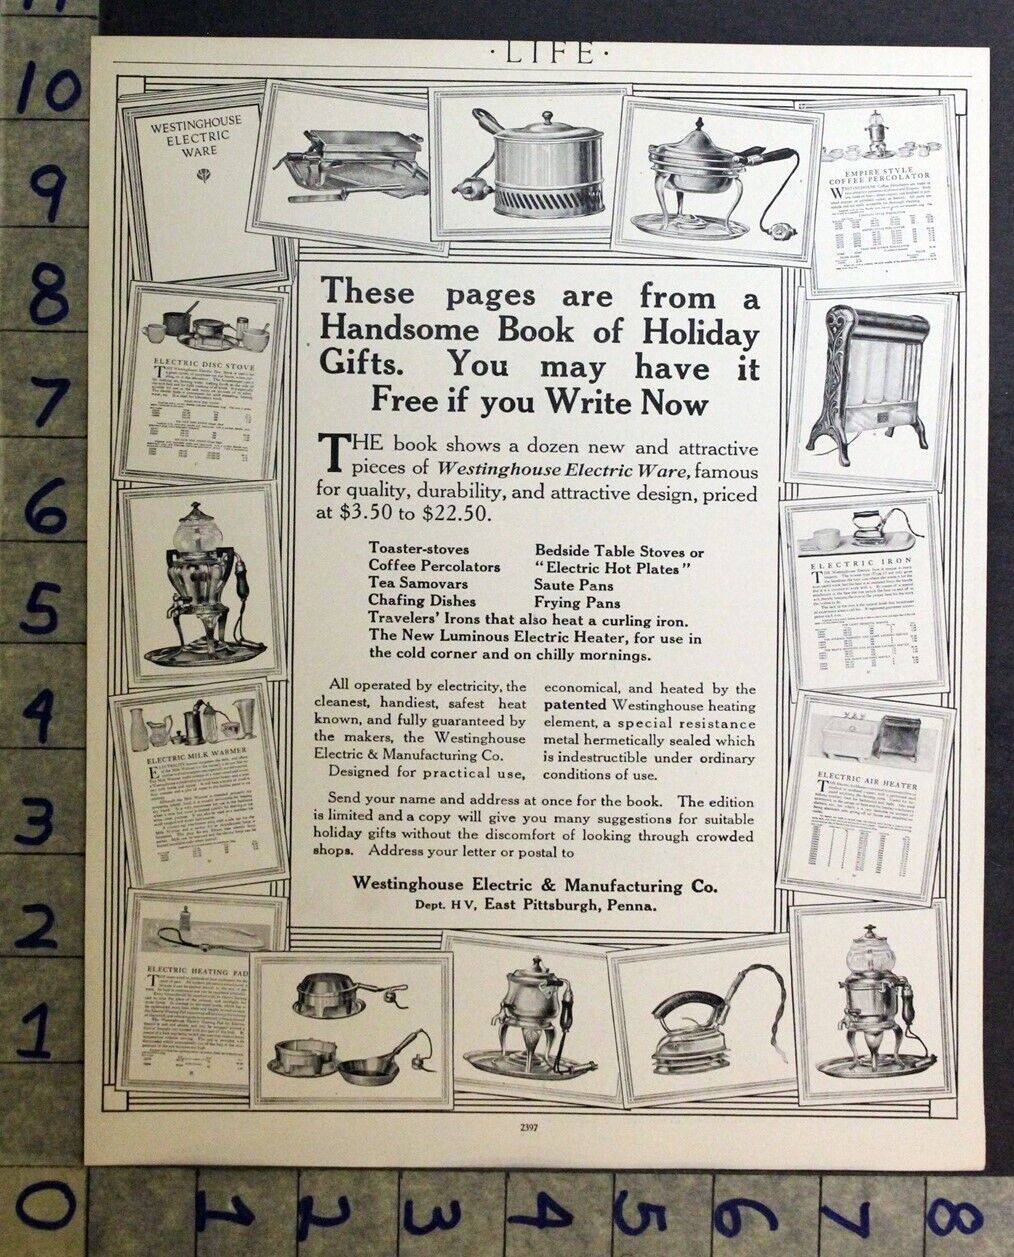 1912 WESTINGHOUSE ELECTRIC APPLIANCES KITCHEN HOLIDAY GIFT HOUSEWARE AD FDA406